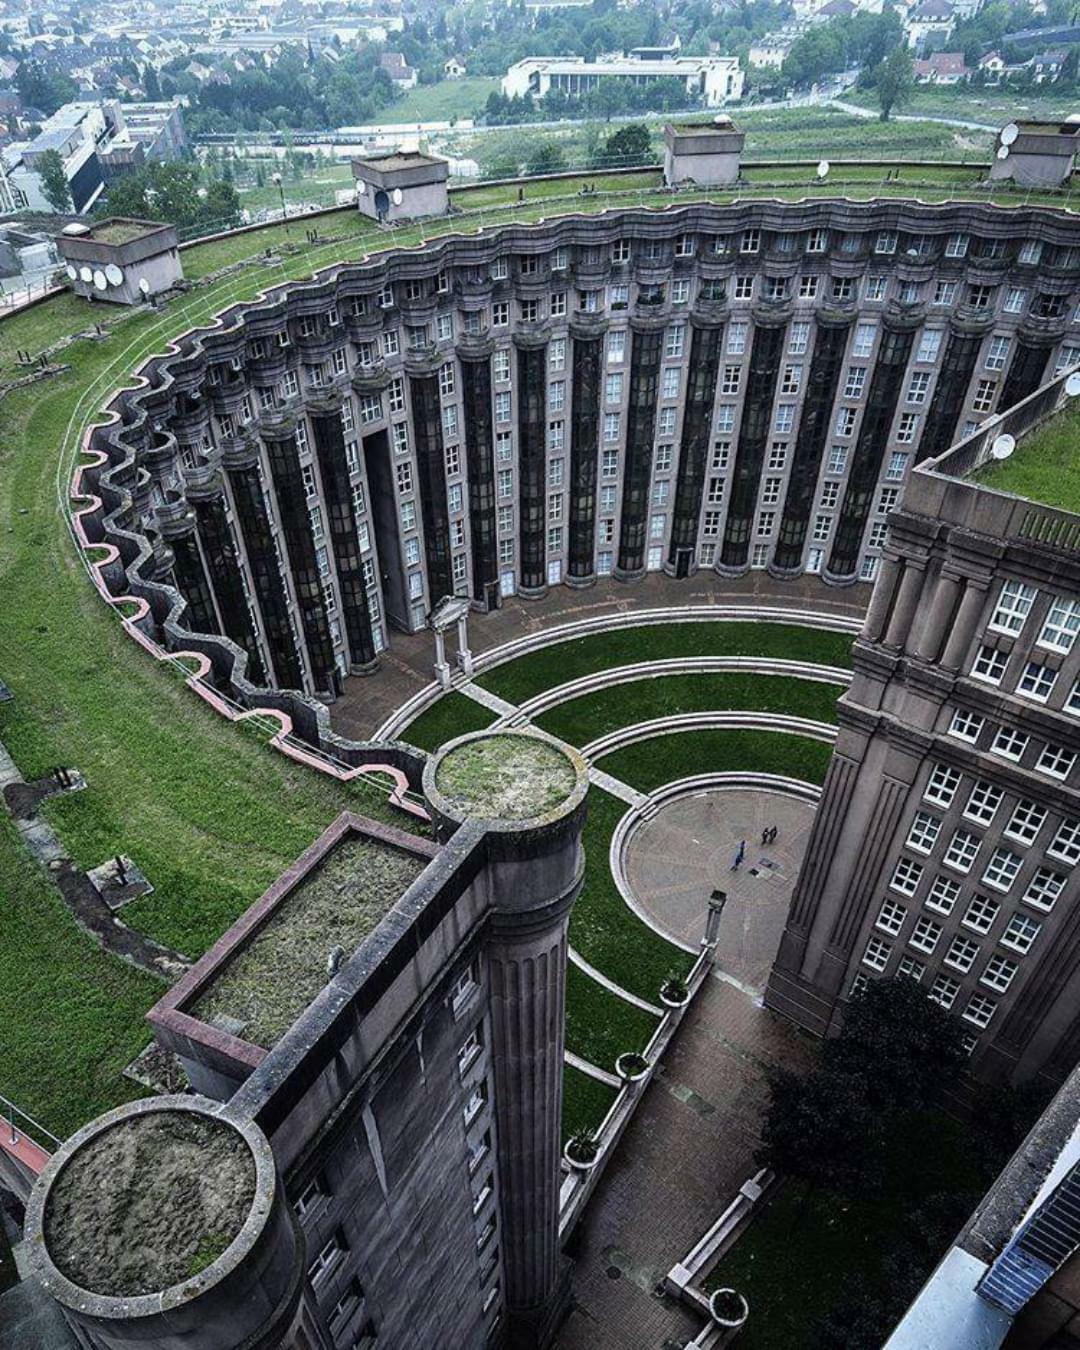 Constructed From 1978 To 1982 In Noisy-Le-Grand, A Suburb Located Ten Miles East Of Paris, Les Espaces D'abraxas Is A Notable Housing Estate Designed By The Late Catalan Architect Ricardo Bofill, Who Passed Away Last Year